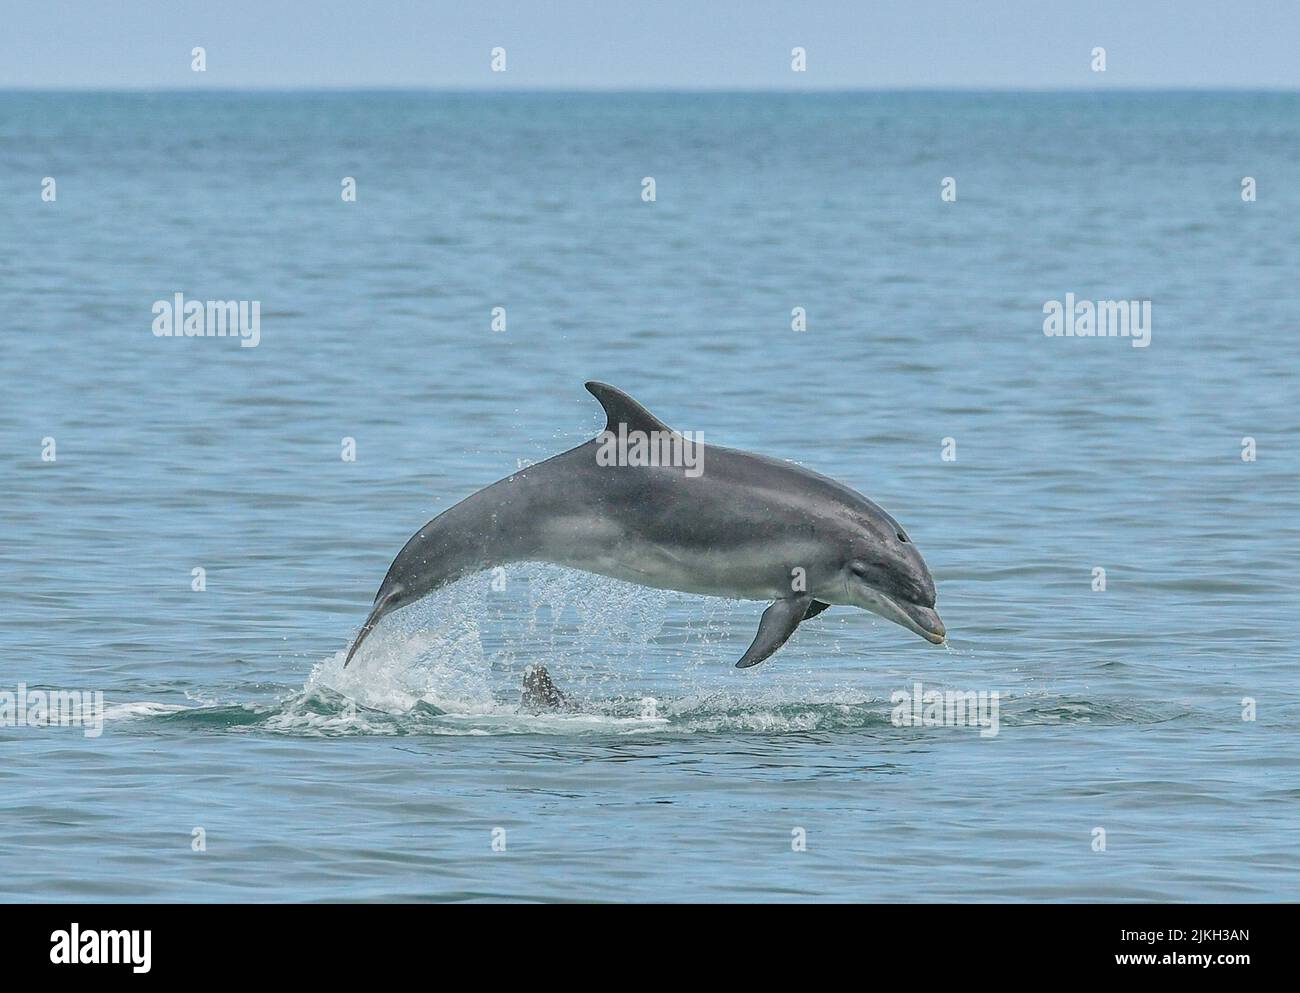 The calf pops its head up to see mummy jump. Wales, UK: STUNNING IMAGES show a mother dolphin training her baby by jumping five feet out of the water Stock Photo